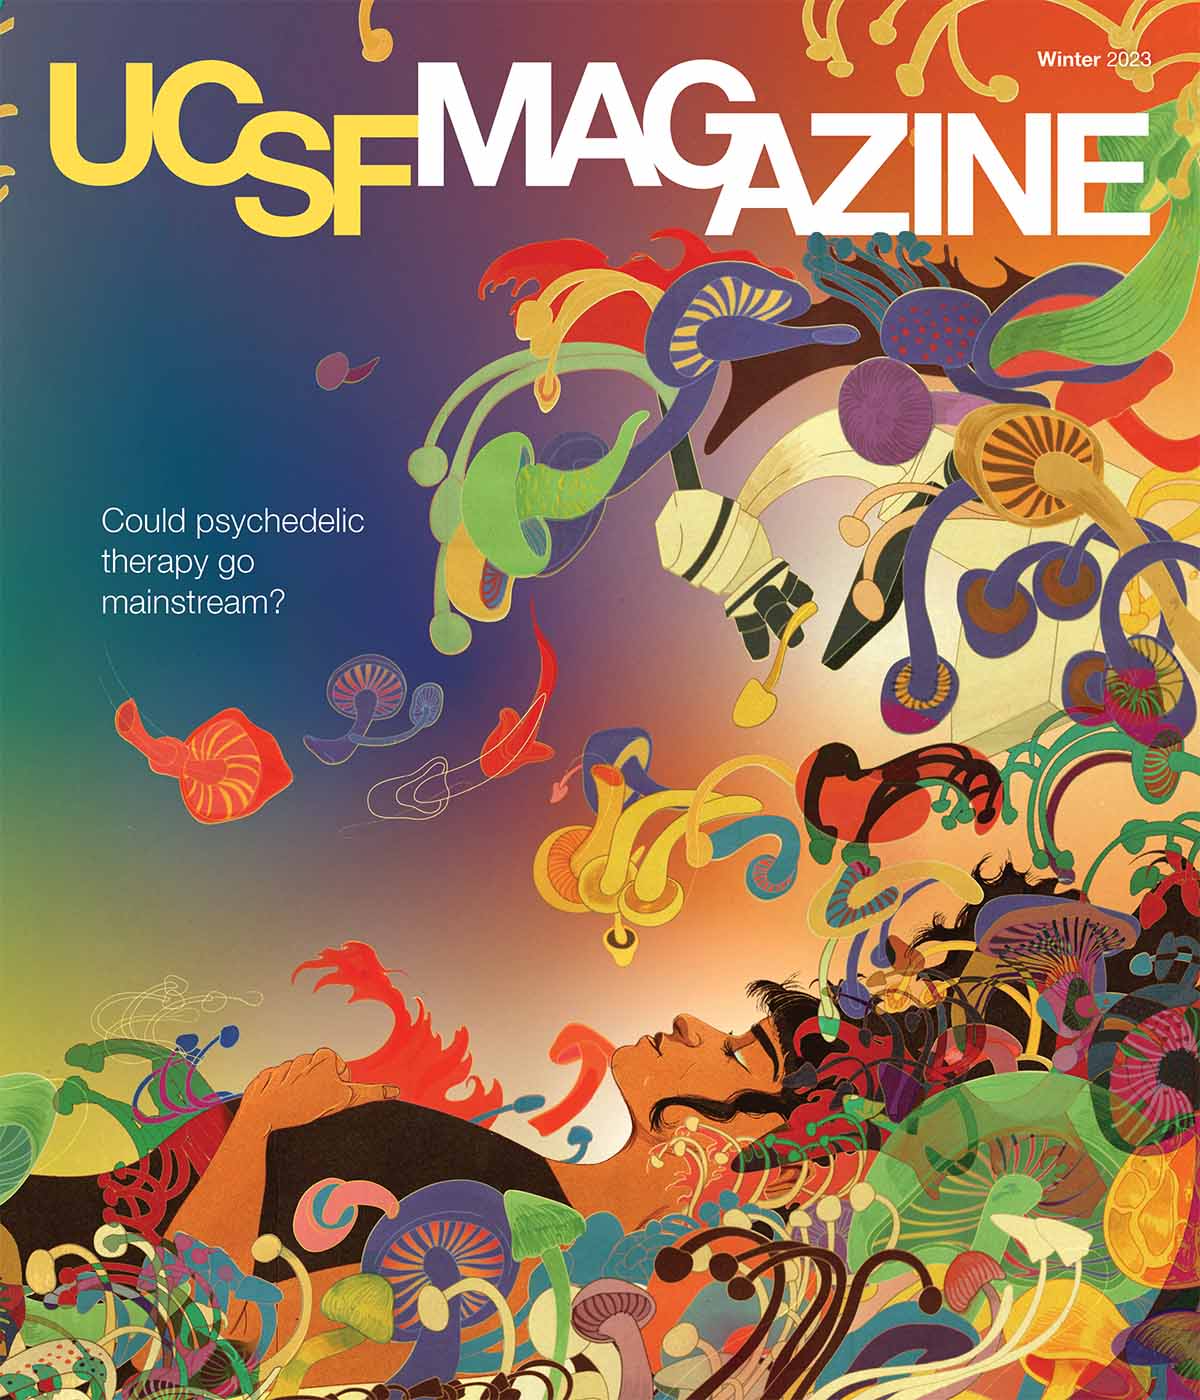 Cover of UCSF Magazine: top reads “UCSF Magazine, Winter 2023”. Text below reads “Could psychedelic therapy go mainstream?”. Illustration of a person laying down with waves of colorful, psychedelic mushrooms flowing around and over them.